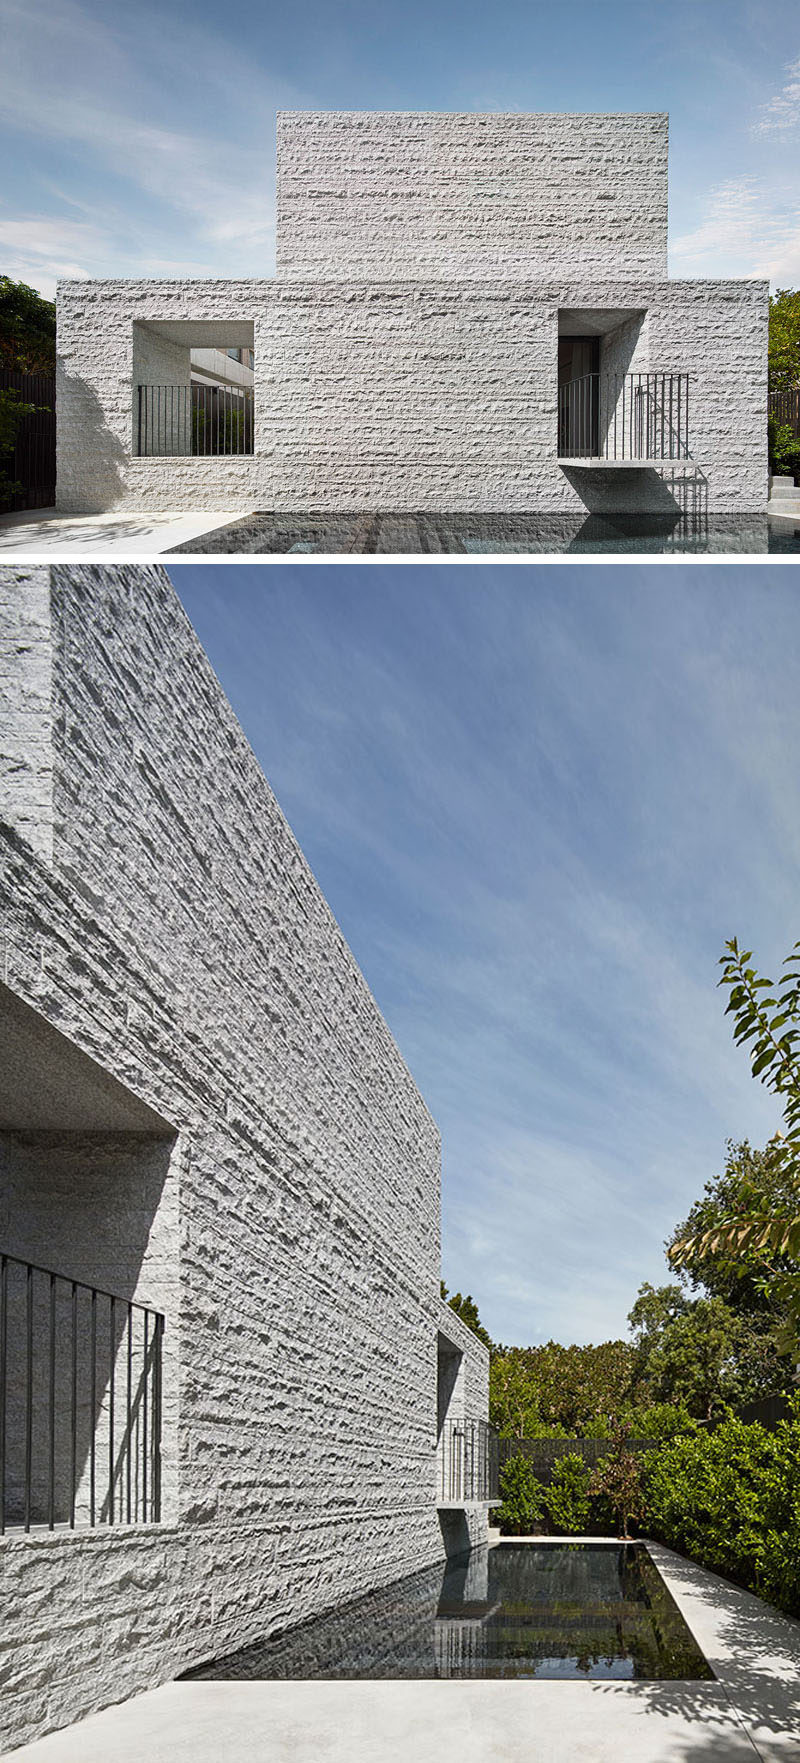 The granite on the exterior of this modern house has a split-faced finish that allows the home to have a textured when viewed from the outside. #Granite #SplitFacedGranite #GraniteHouse #ModernHouse